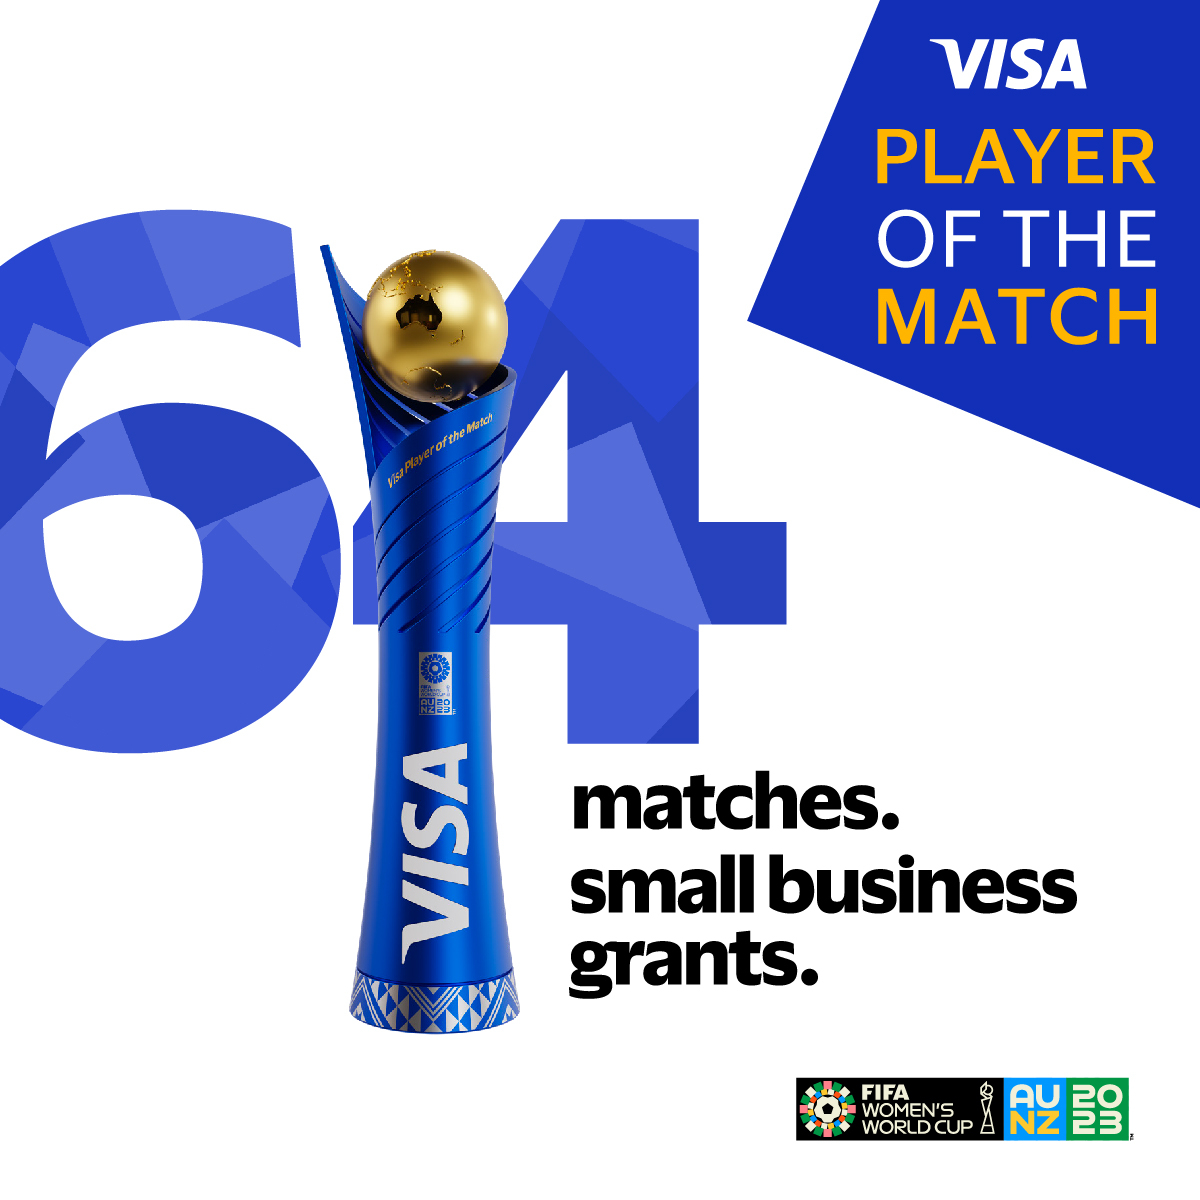 Visa Player of the Match Will Deliver a Win for Women-Owned Businesses at FIFA Womens World Cup™ Business Wire